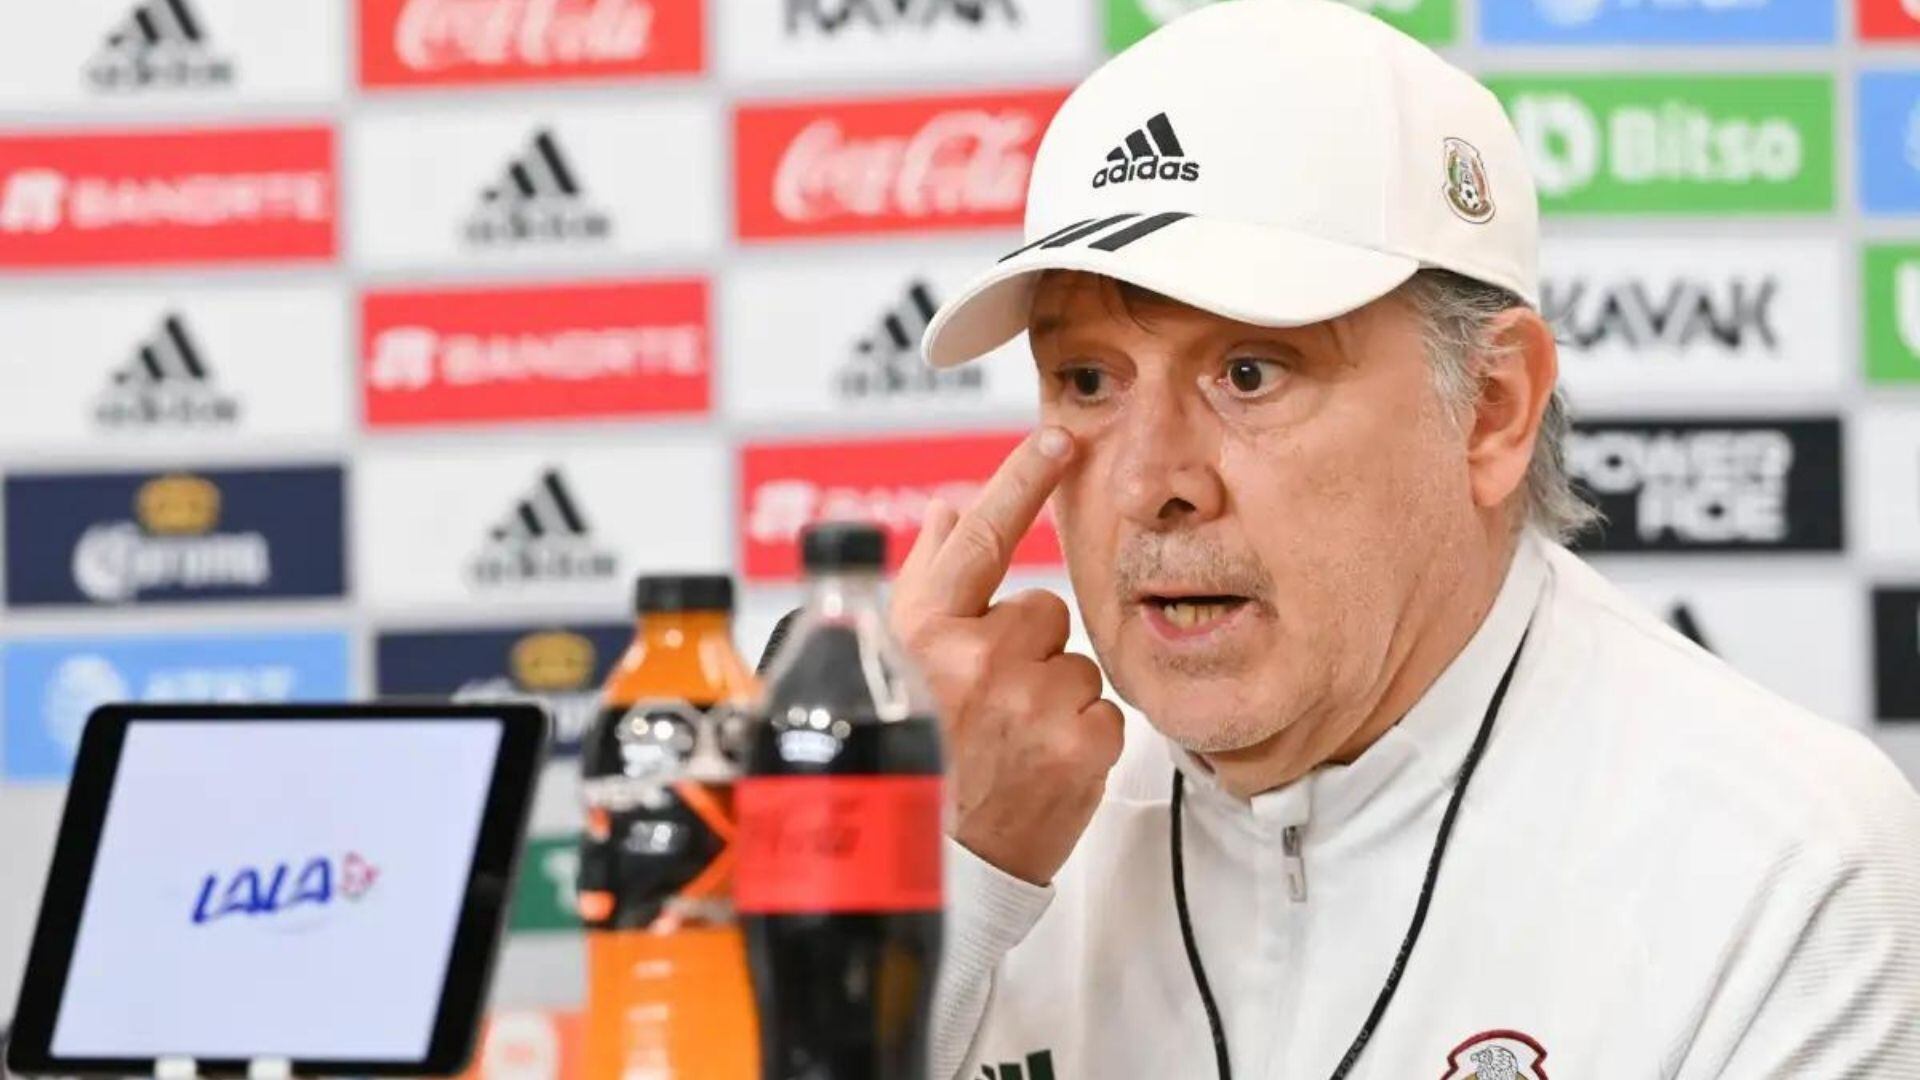 Gerardo Martino spoke about stepping down from Mexico National Team due to his health condition